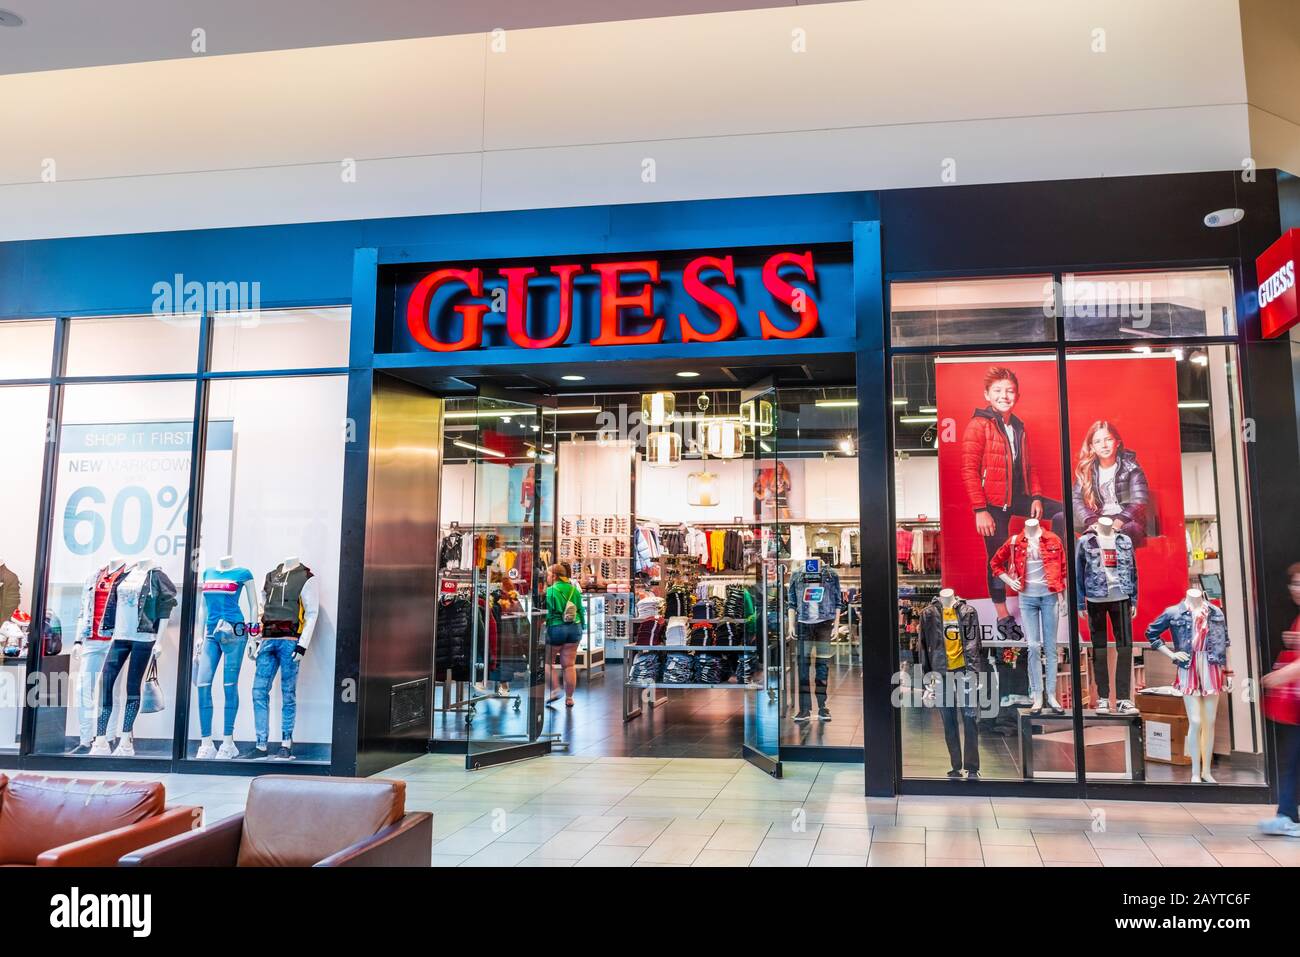 Jan 31, 2020 / CA / USA - Guess store in a South San Francisco Bay area mall; (styled as GUESS or Guess?) is an American clothing brand Stock Photo Alamy